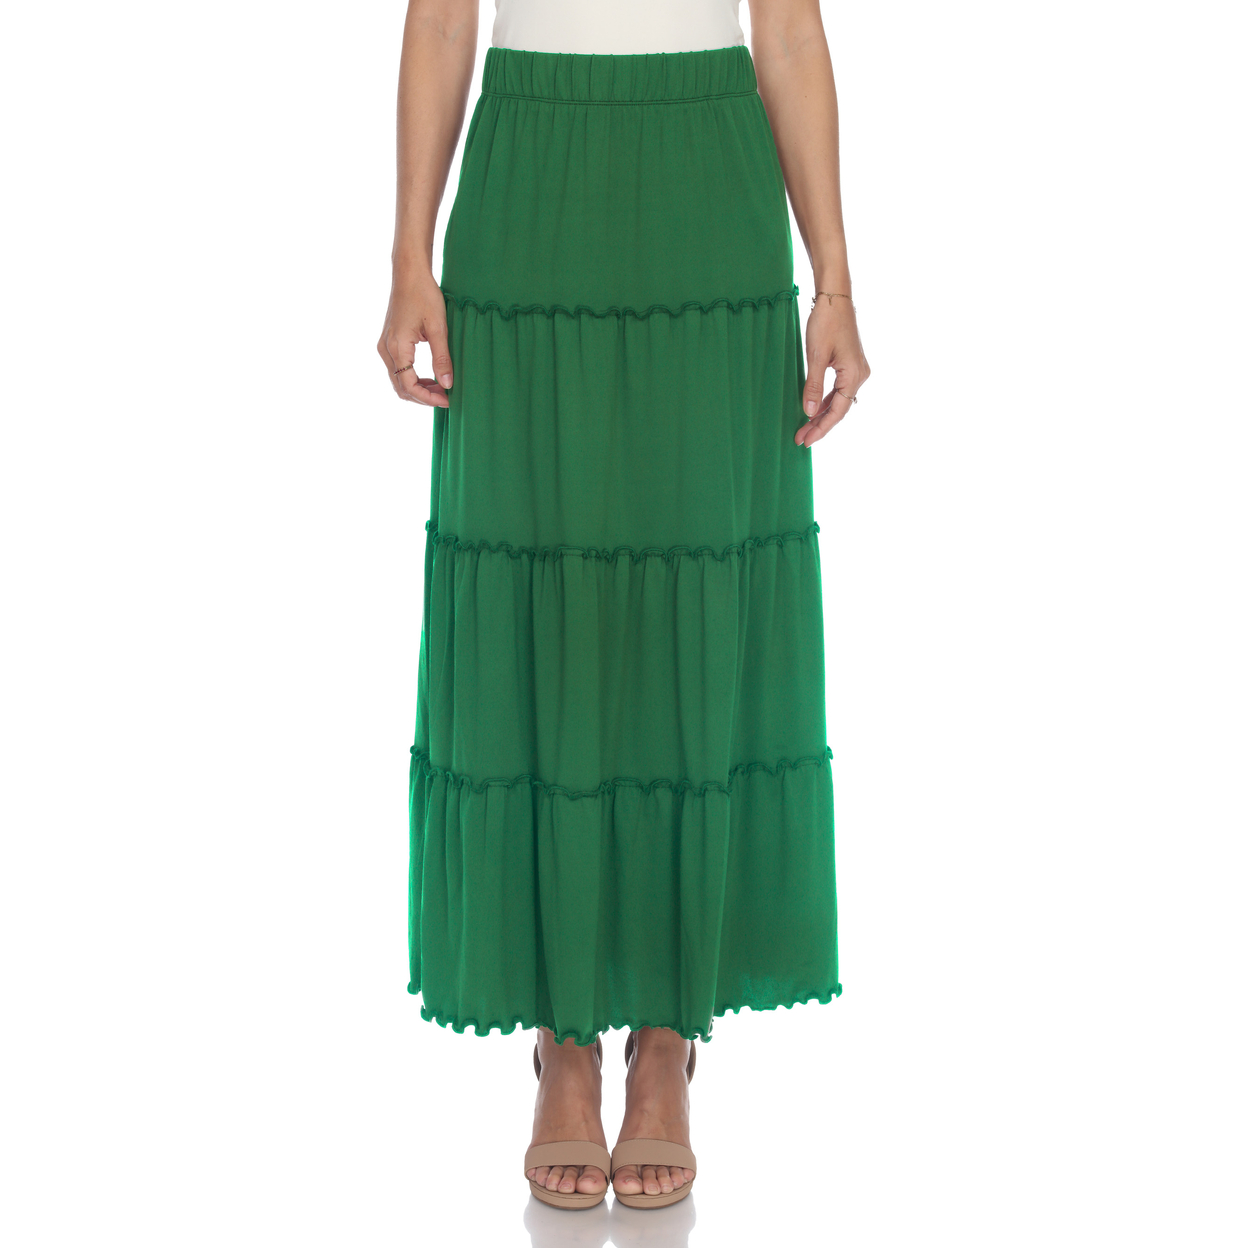 White Mark Women's Tiered Maxi Skirt With Pockets - Green, X-large